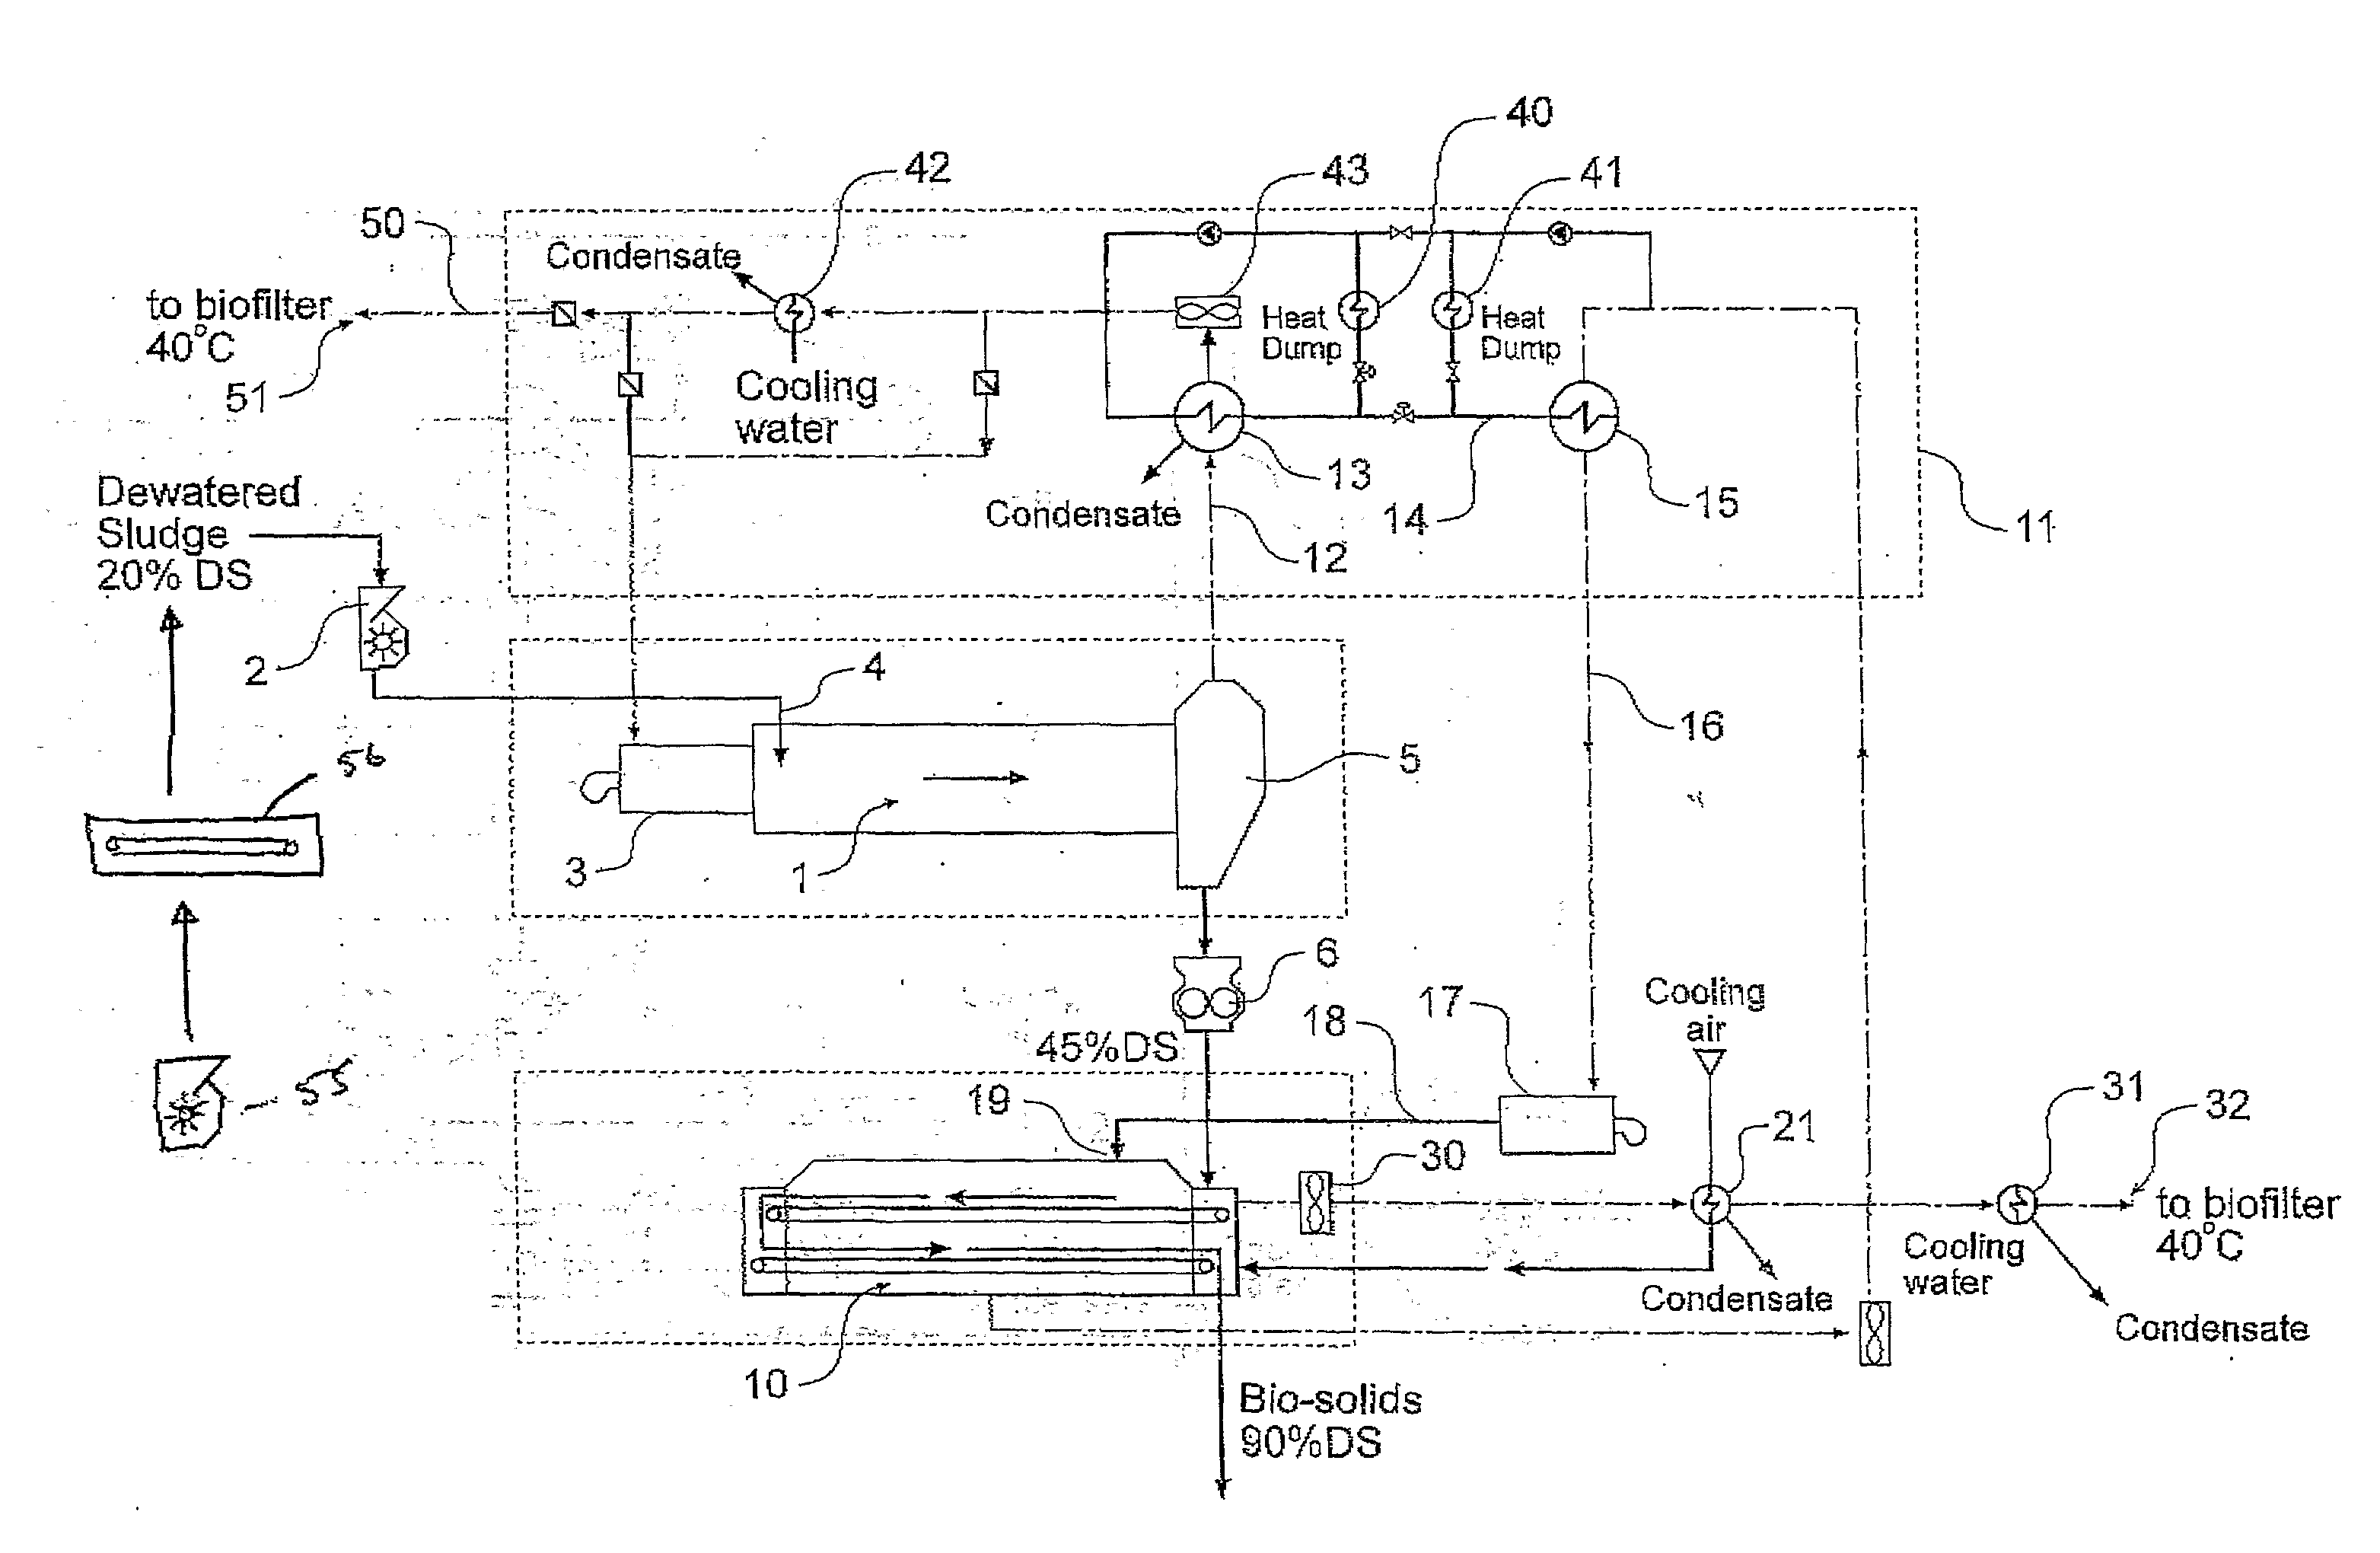 Method of Drying Pasty Materials and/or Apparatus for Drying Pasty Materials